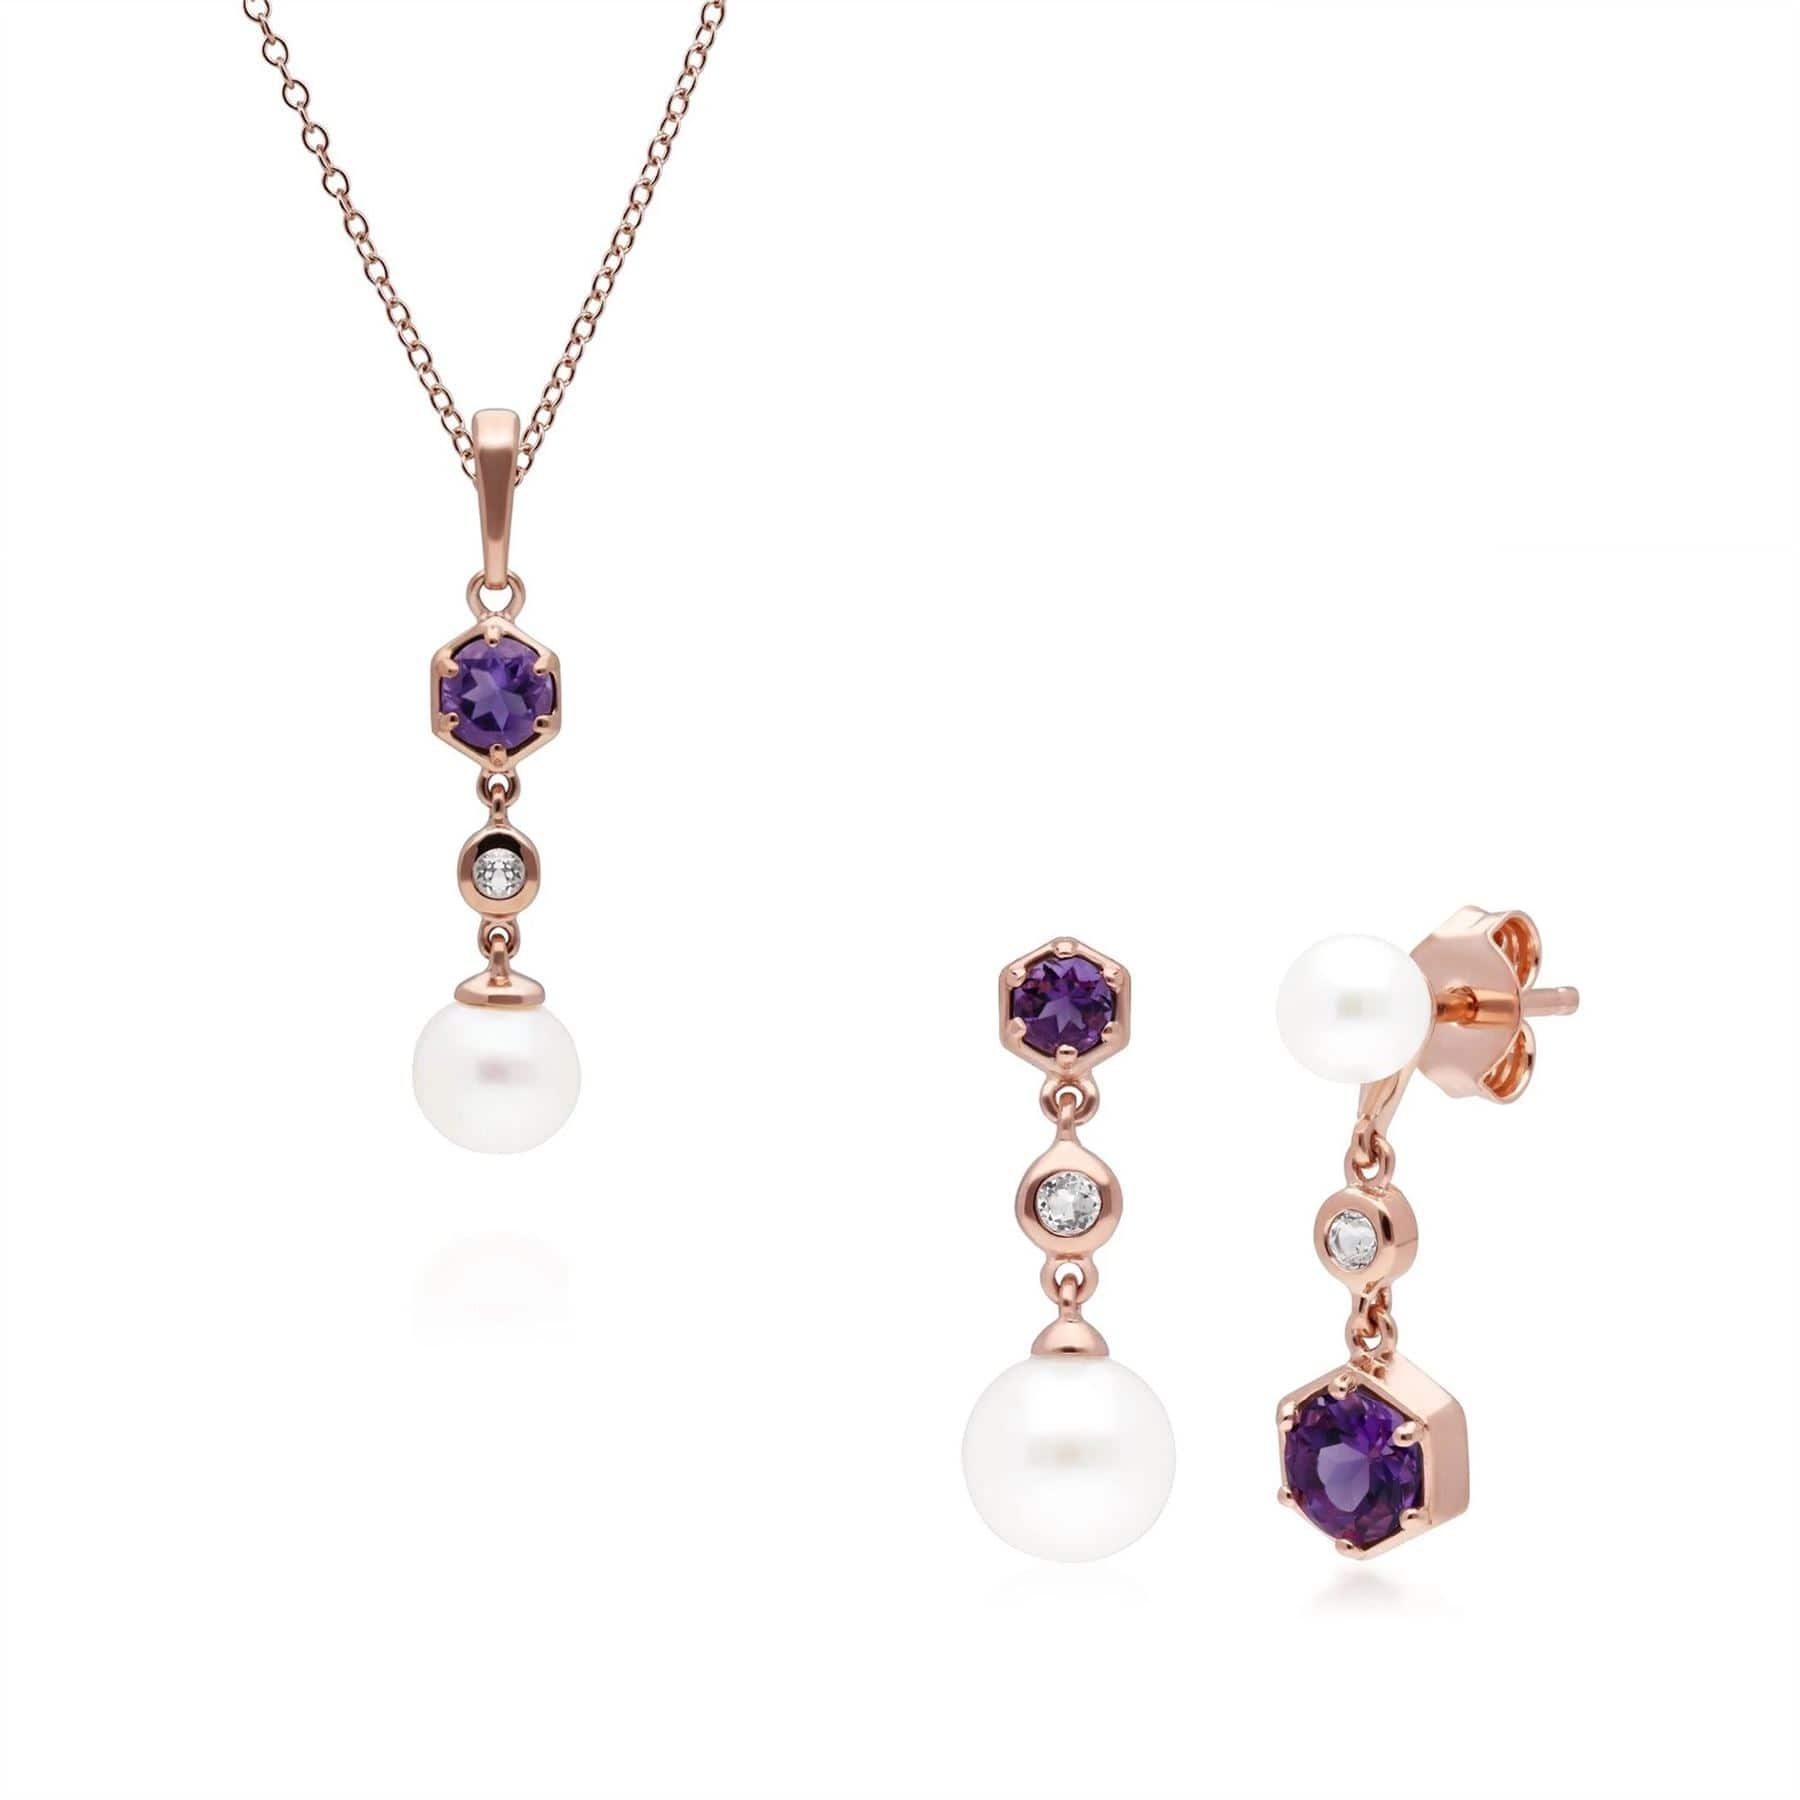 270P030304925-270E030304925 Modern Pearl, Amethyst & Topaz Pendant & Earring Set in Rose Gold Plated Silver 1